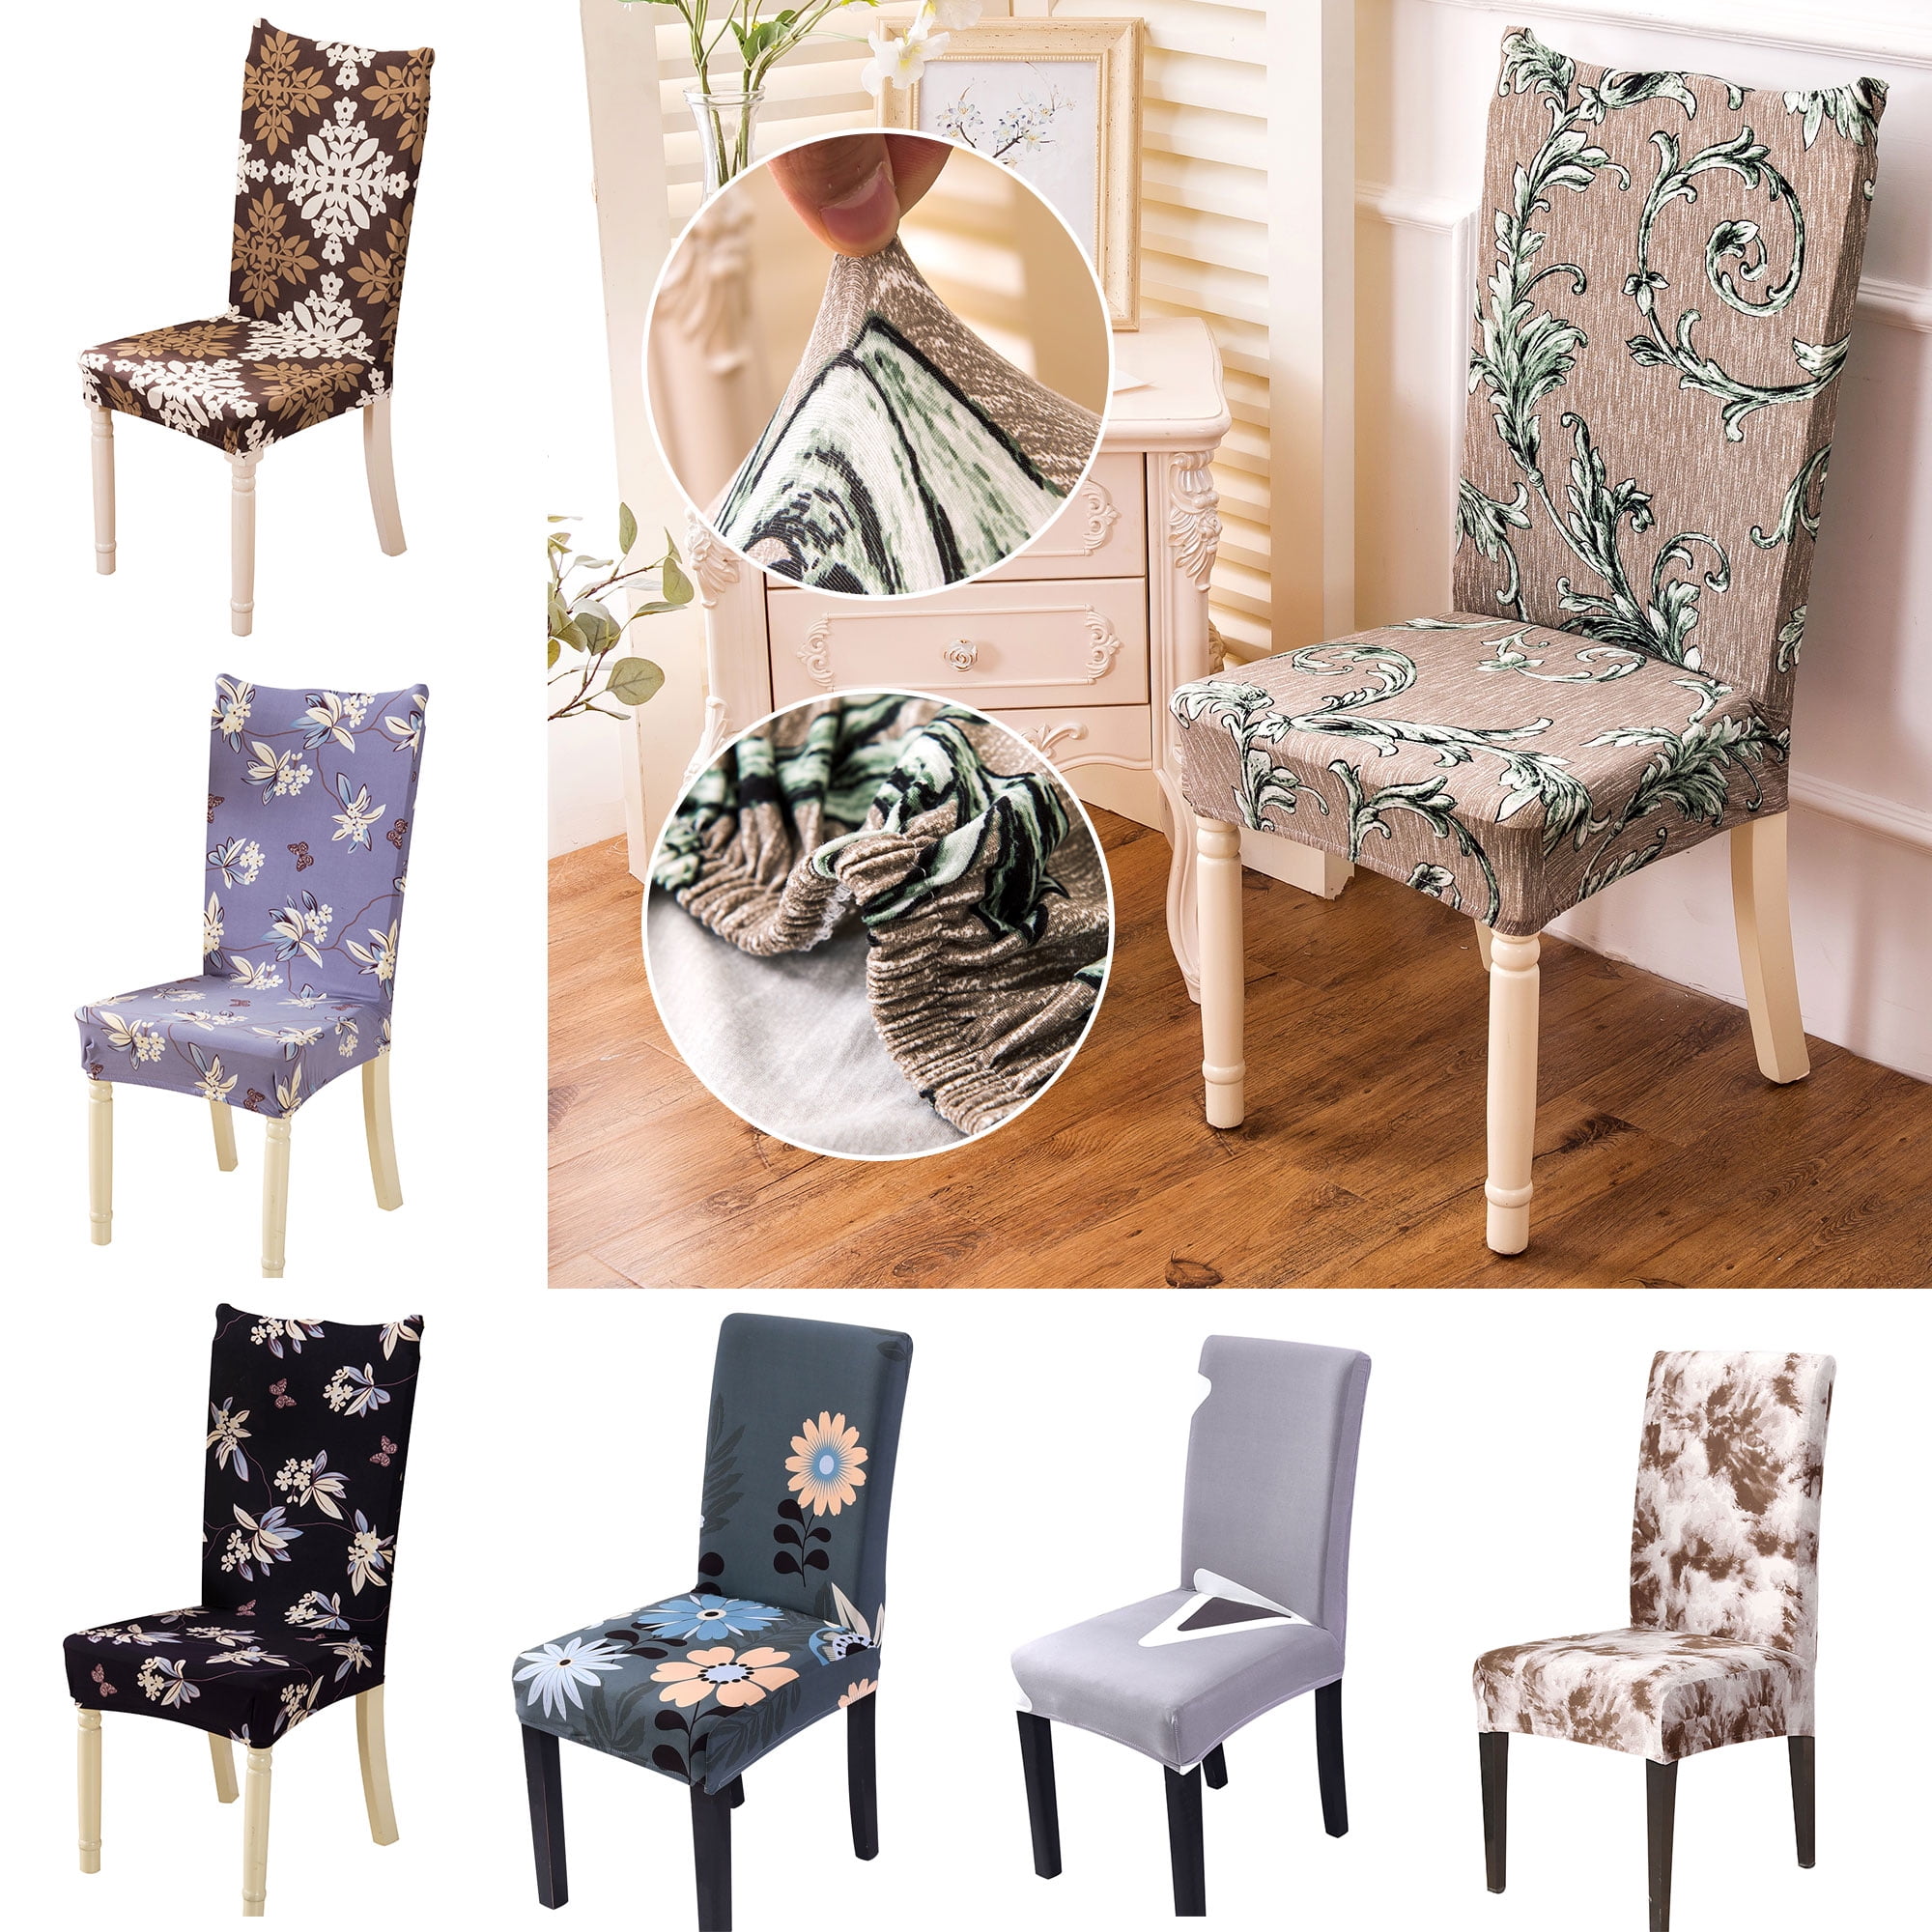 Details about   1/4/6Pcs Spandex Stretch Dining Chair Covers Seat Cover Slipcovers Home Decor US 